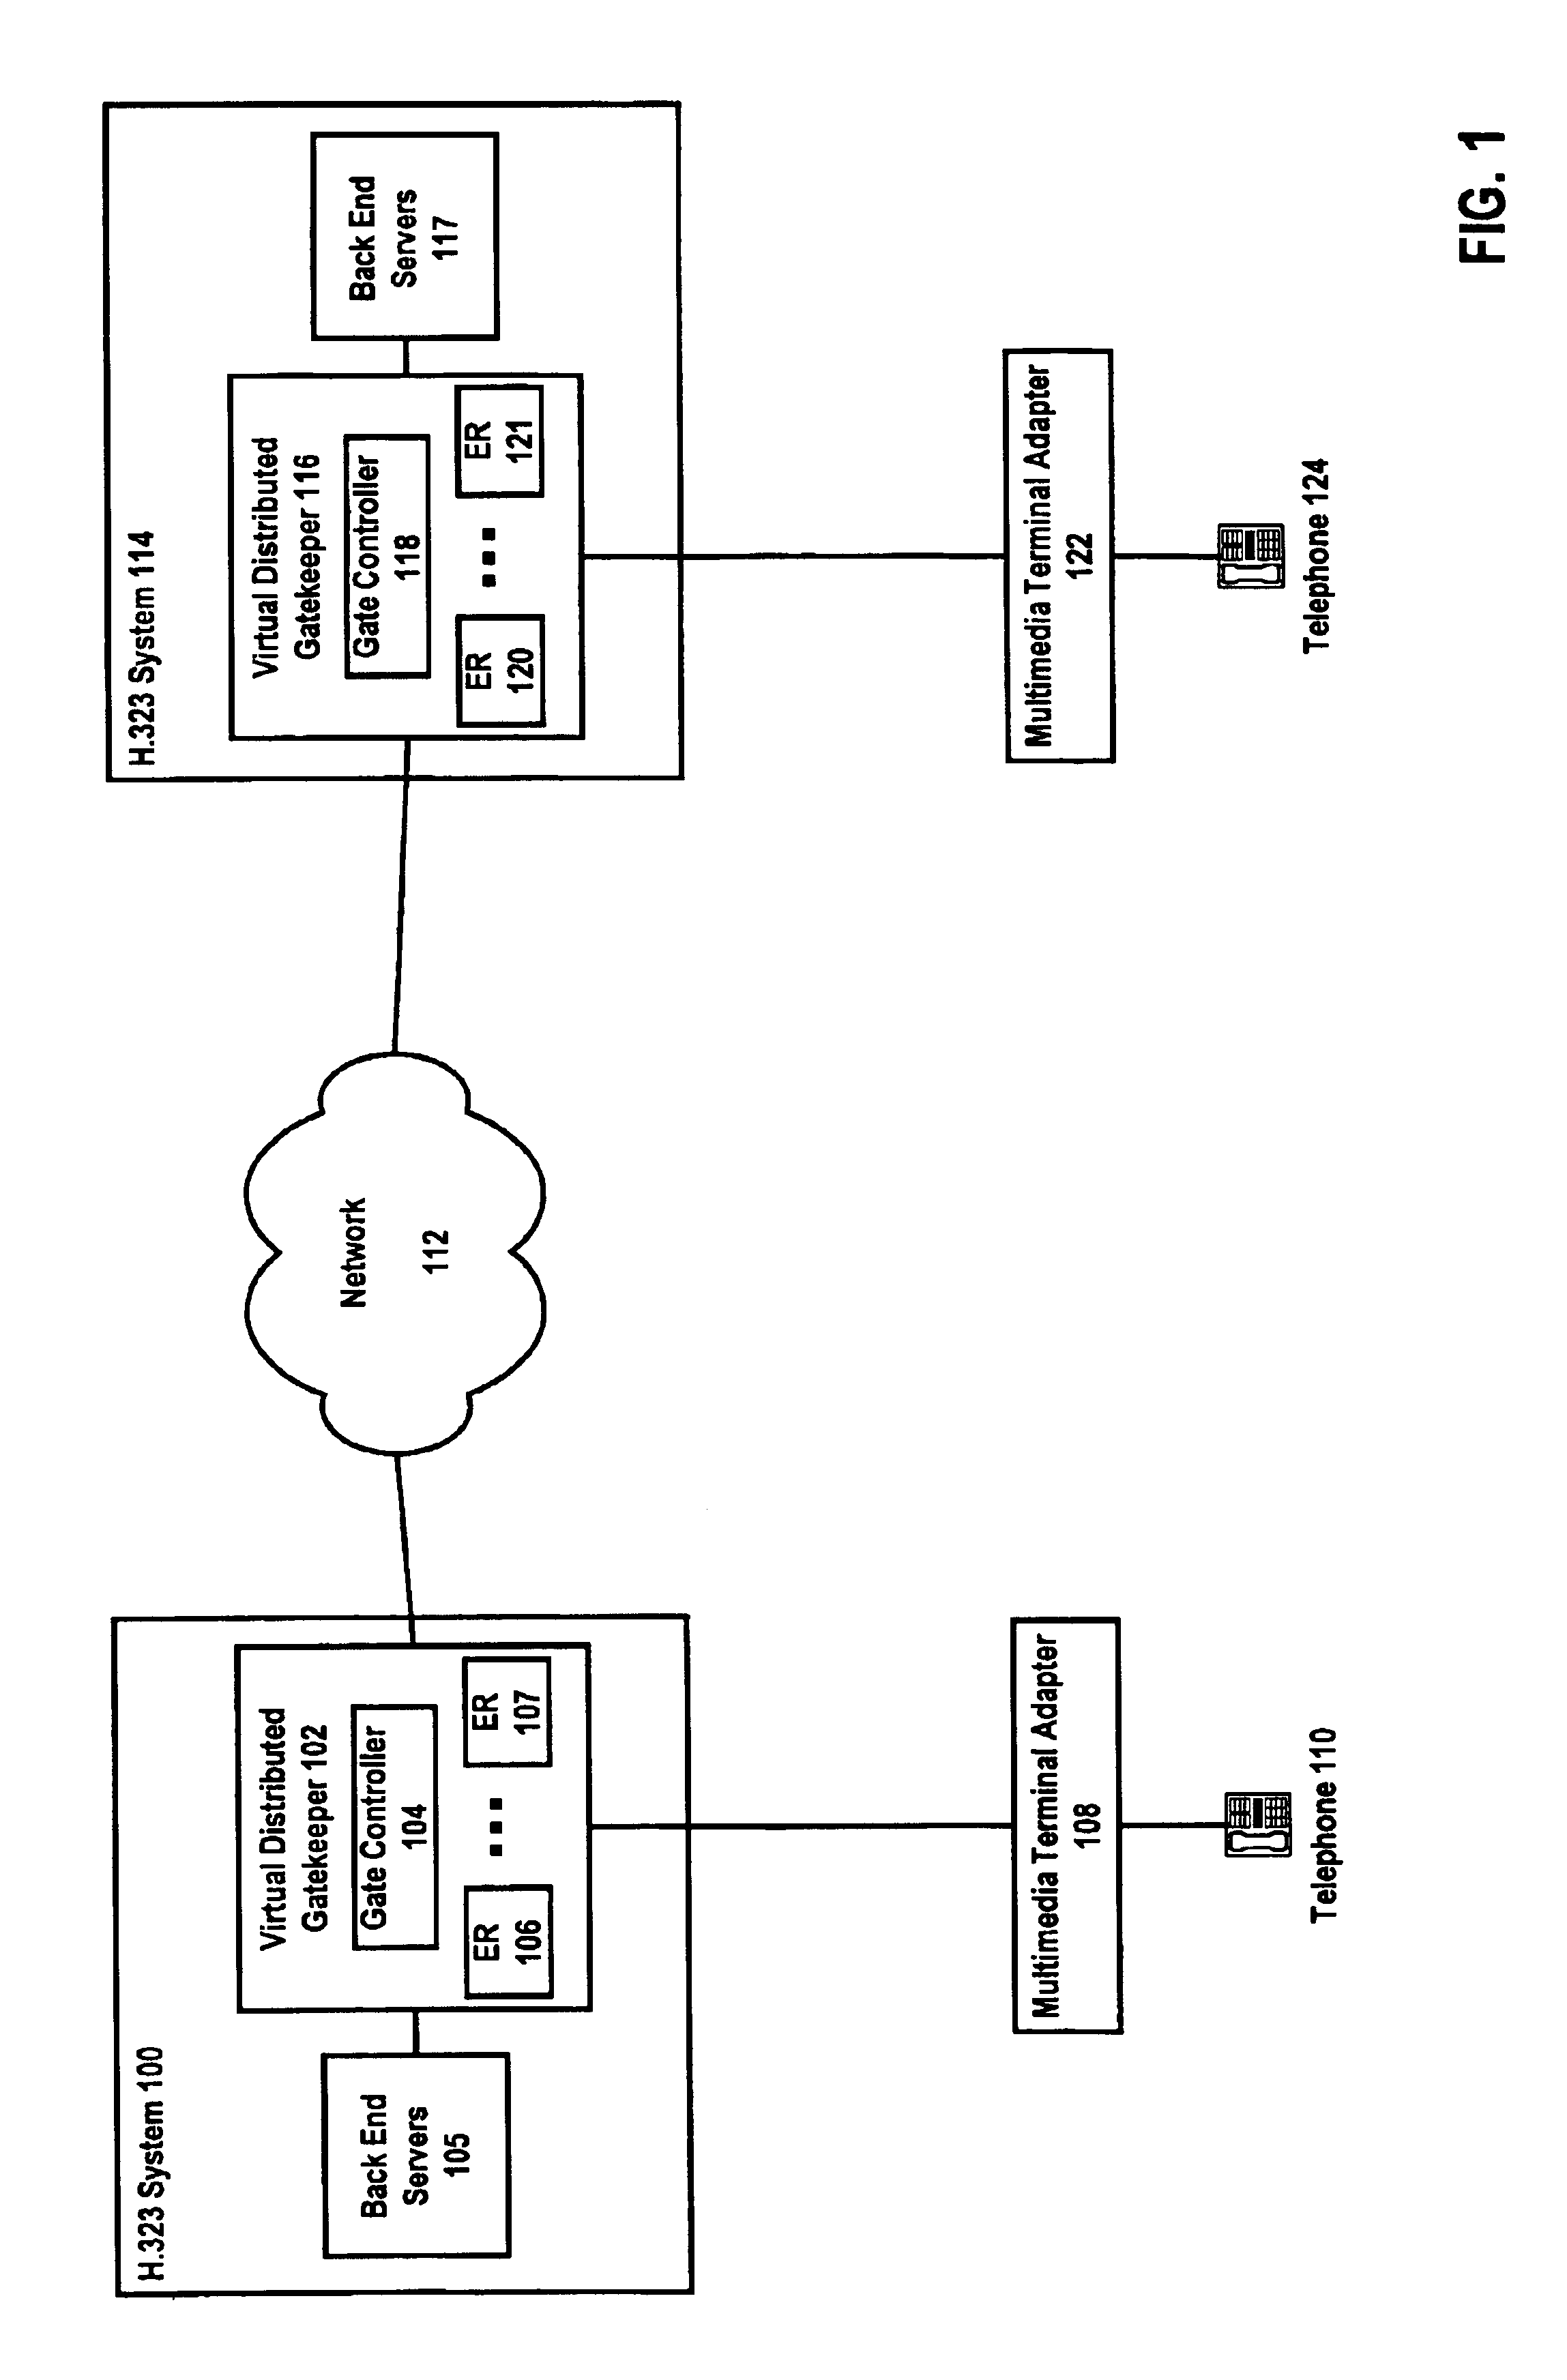 Method and apparatus for providing a virtual distributed gatekeeper in an H.323 system